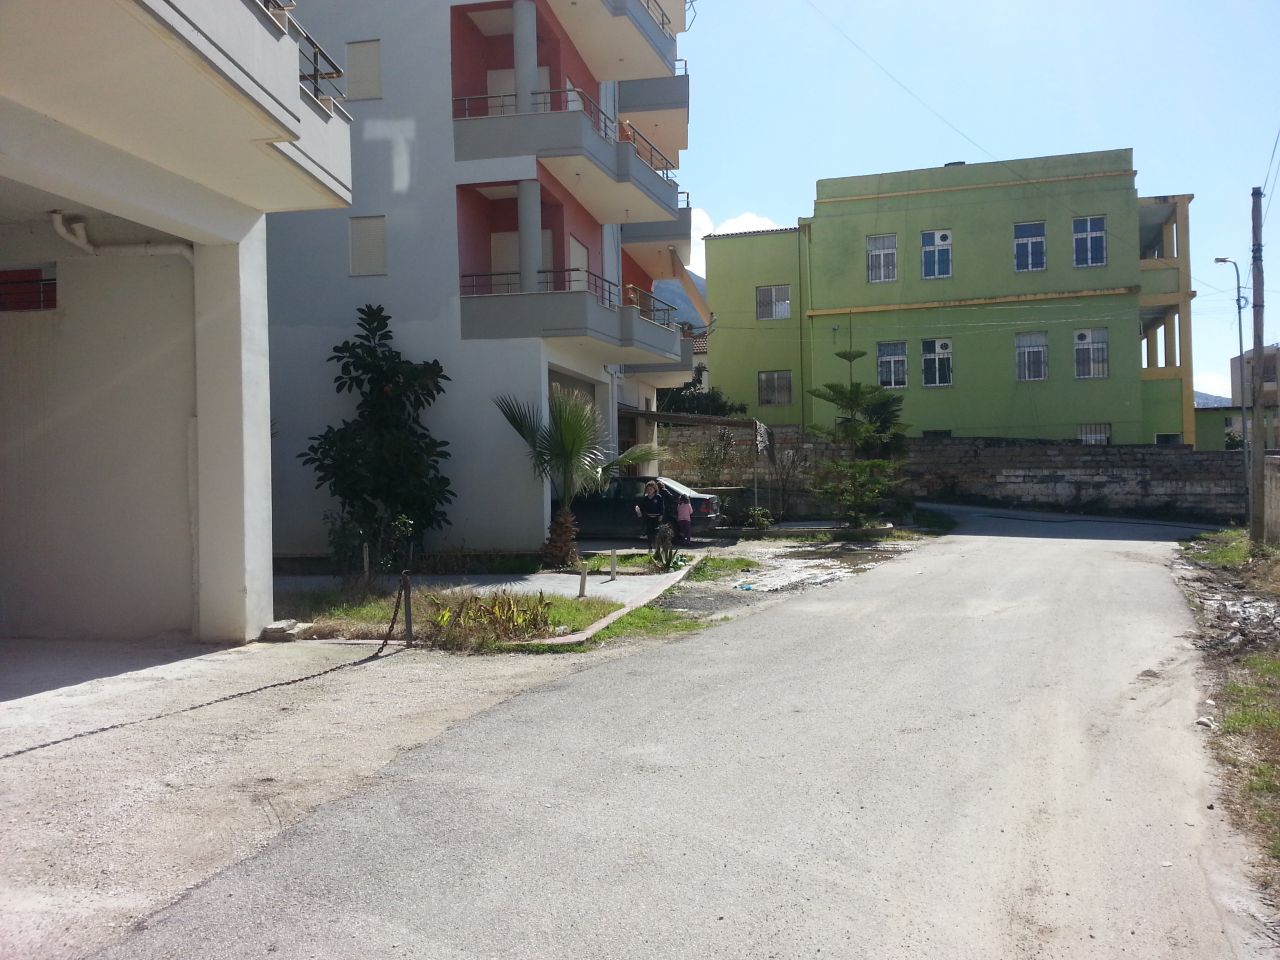 Albania Real Estate in Vlore. Apartments for Sale in Vlore with Albania Property Group